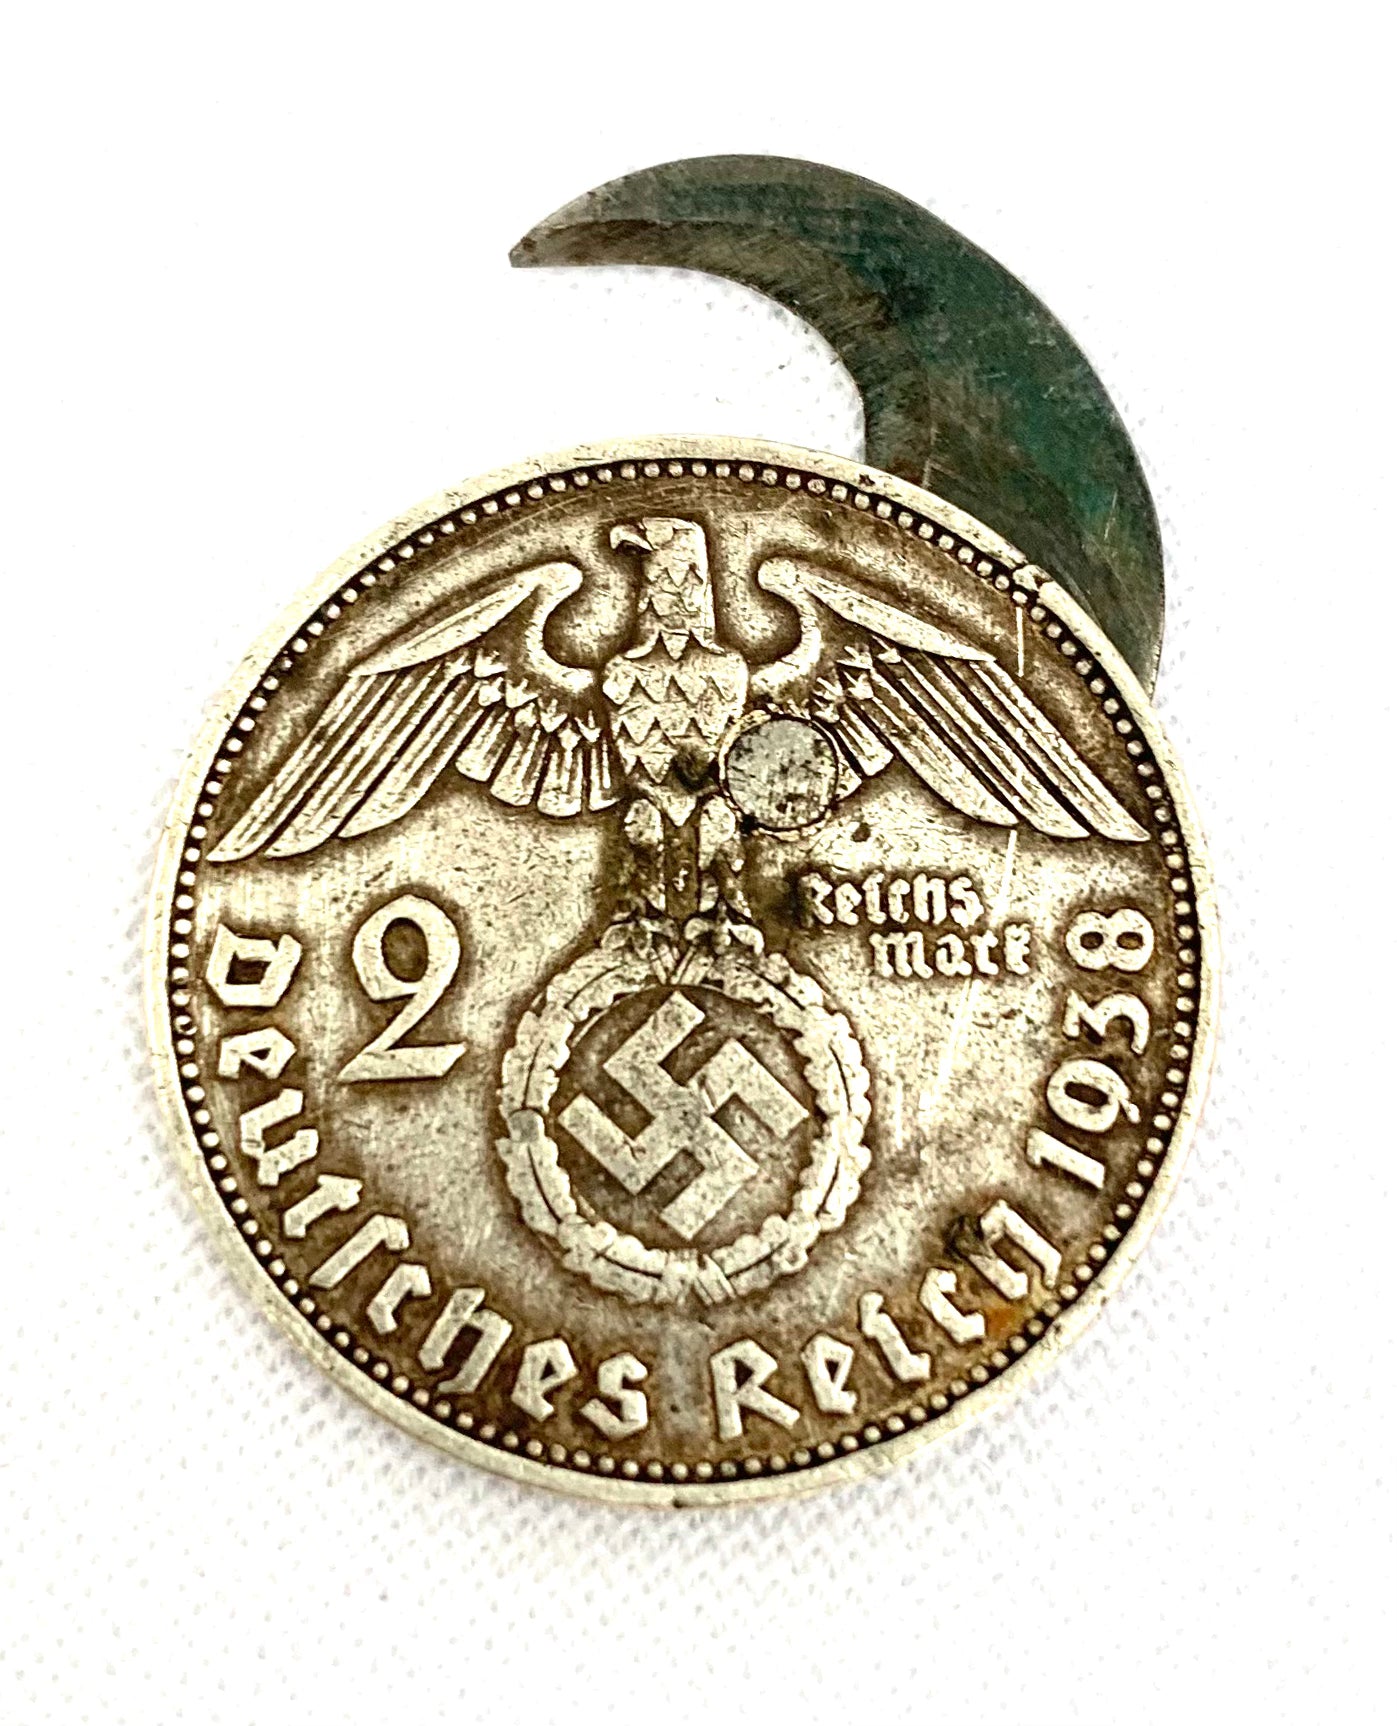 WW2 SOE German 2 Reichsmark Coin with Concealed Blade.